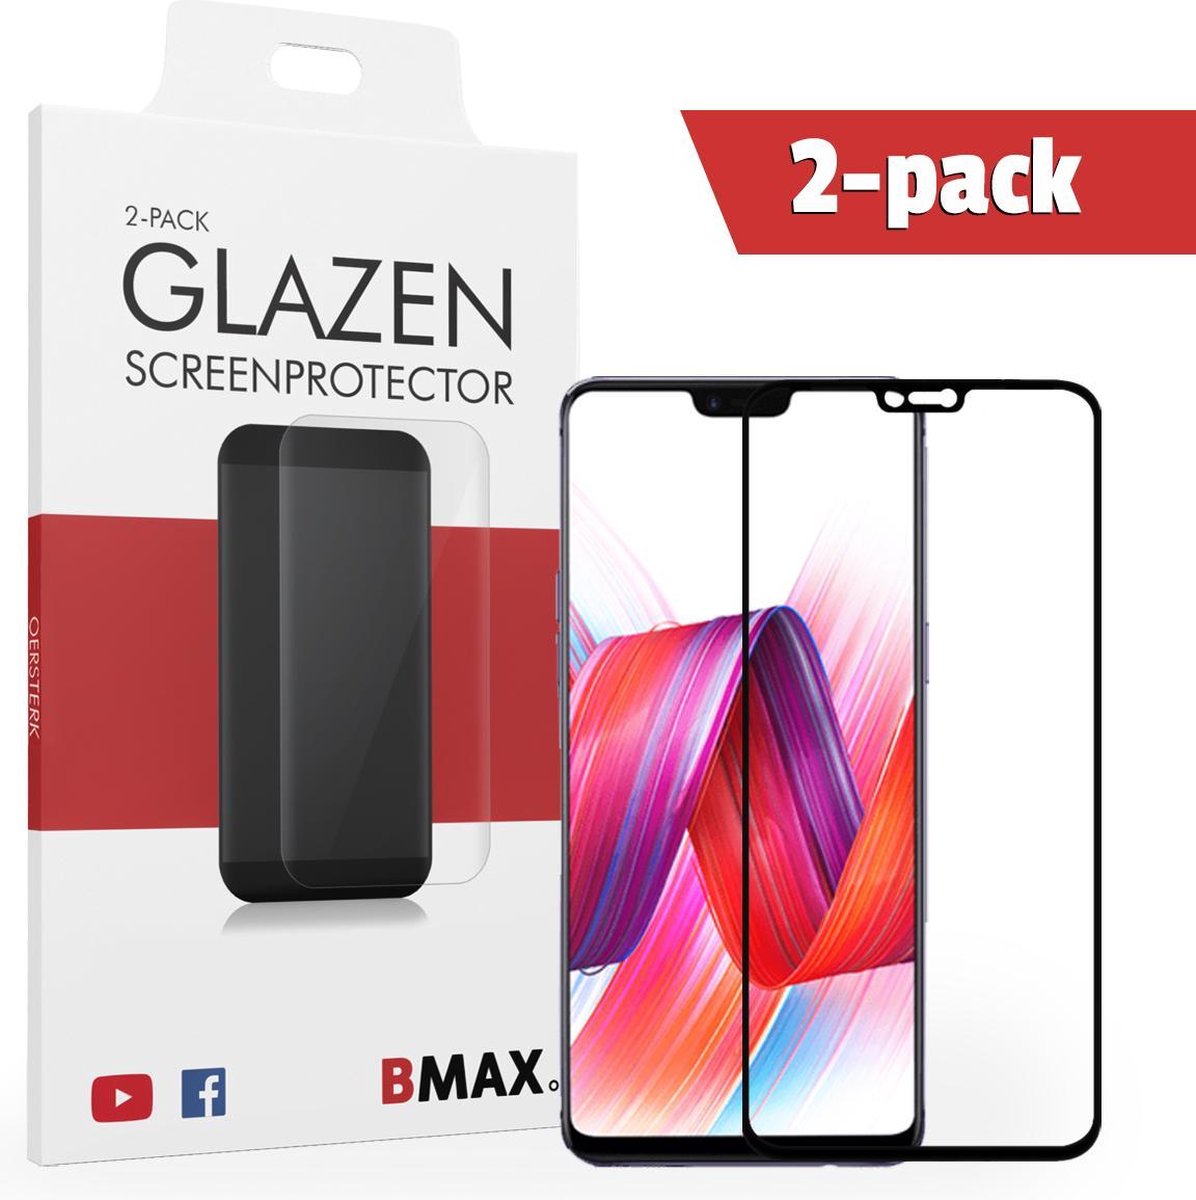 2-pack Bmax Oppo R15 Pro Screenprotector - Glass - Full Cover 2.5d - Black